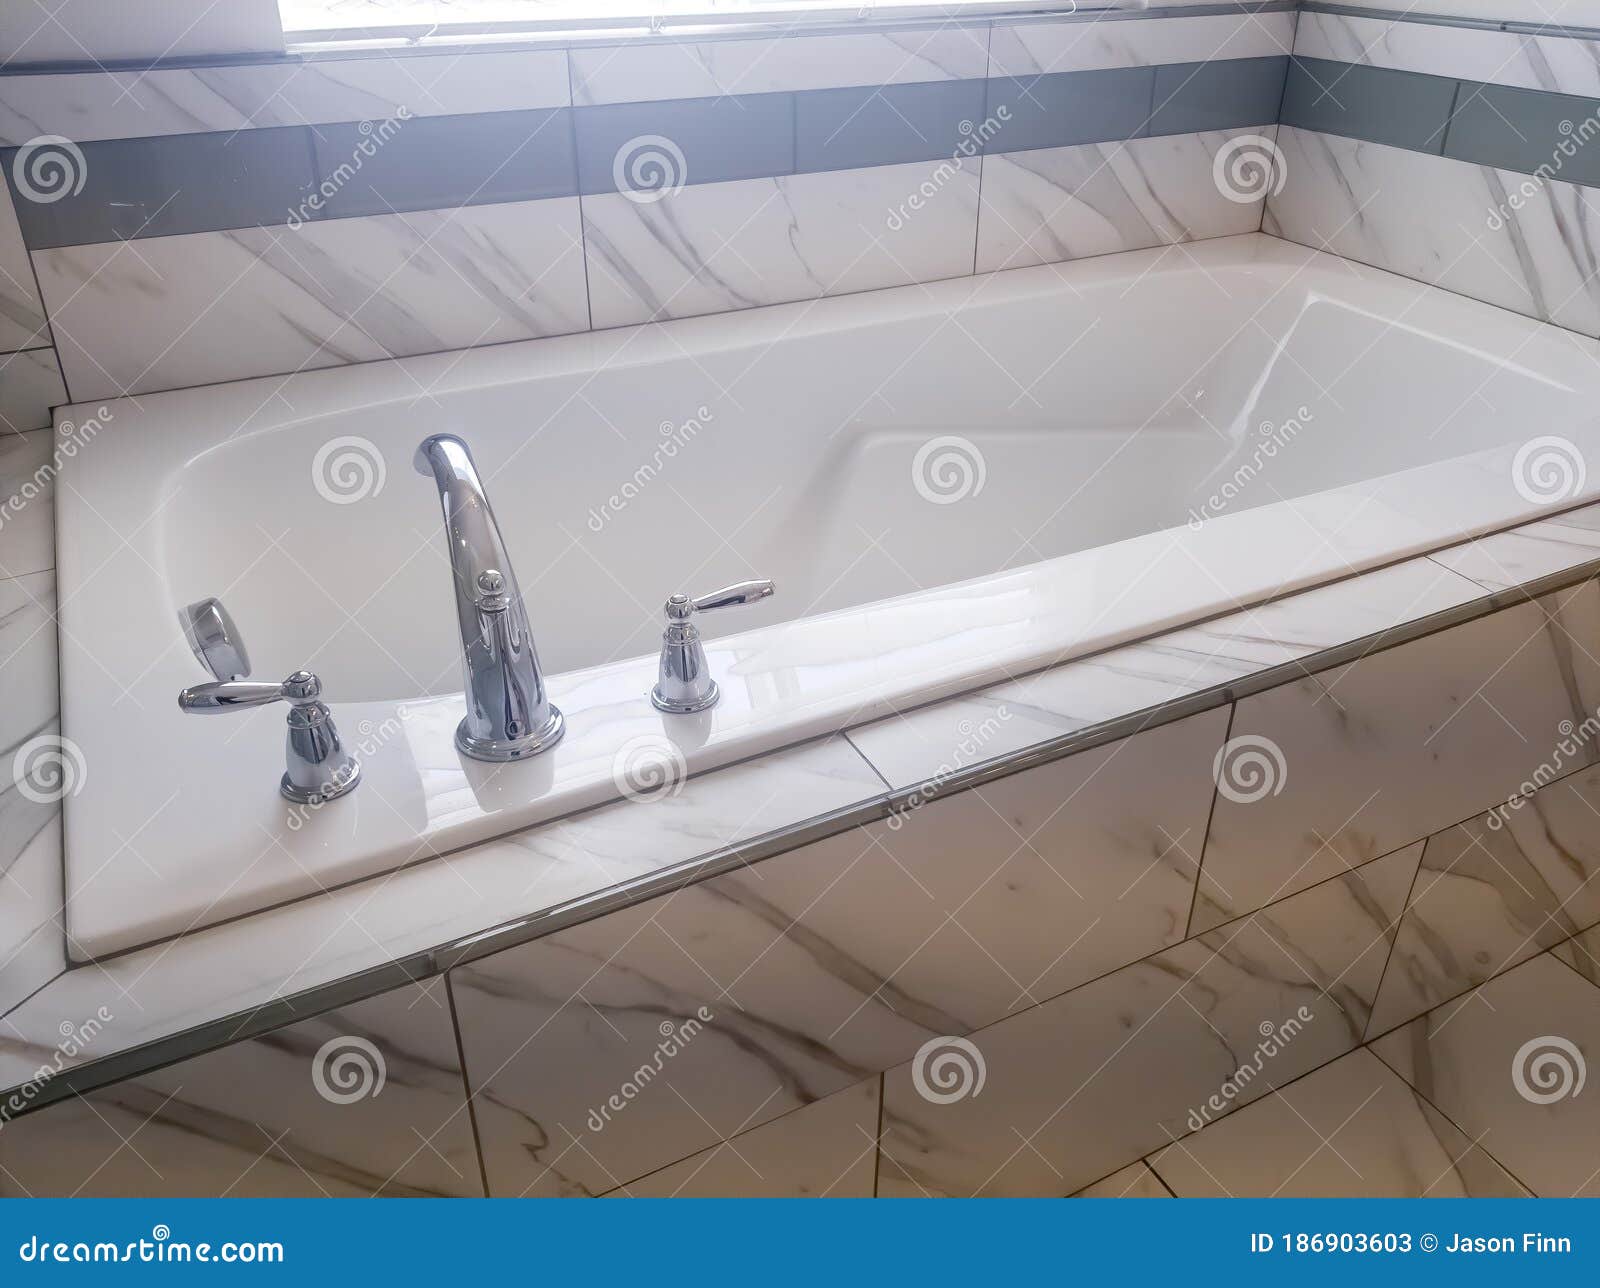 Close Up Of Built In Rectangular Bathtub With Stainless Steel Faucet And Handles Stock Image Image Of Steel Handle 186903603